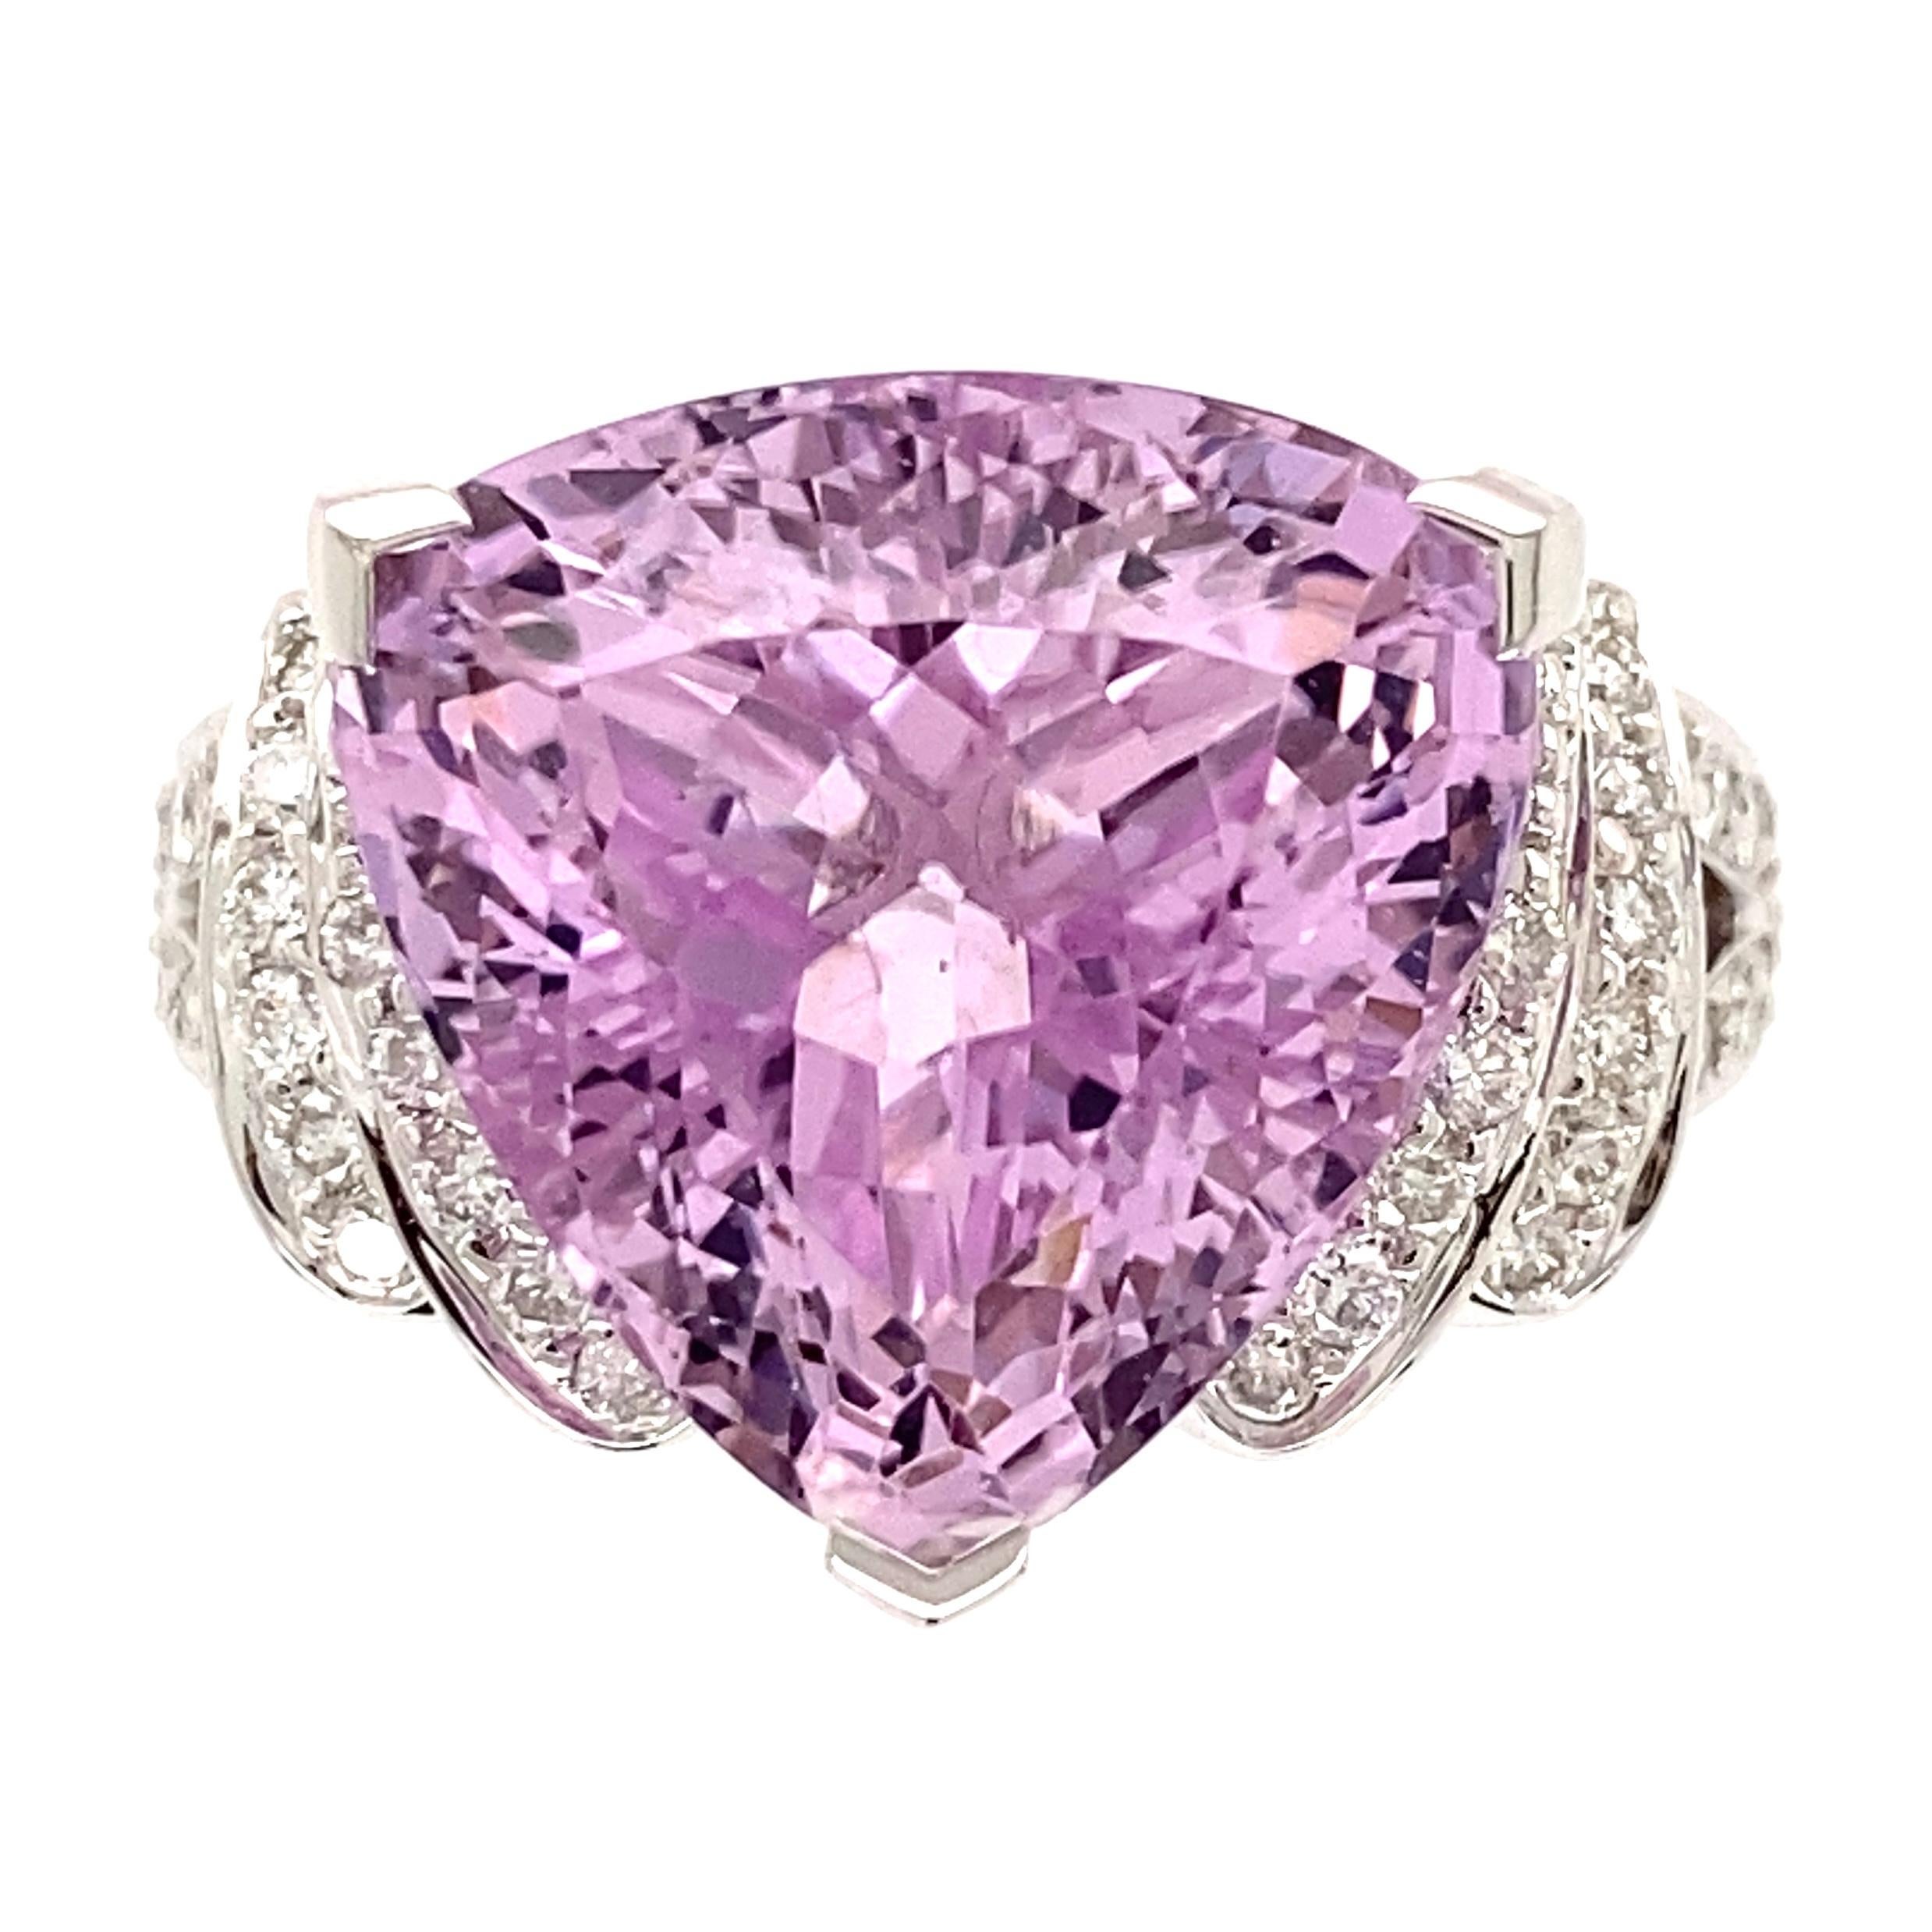 Simply Beautiful! Trillion Kunzite and Diamond Gold Cocktail Ring. Securely Hand set with a Trillion Kunzite, weighing approx. 12.65 Carats and Diamonds weighing approx. 0.58tcw. Hand crafted 18K White Gold. Measuring approx. 1.16” l x 0.88” w x